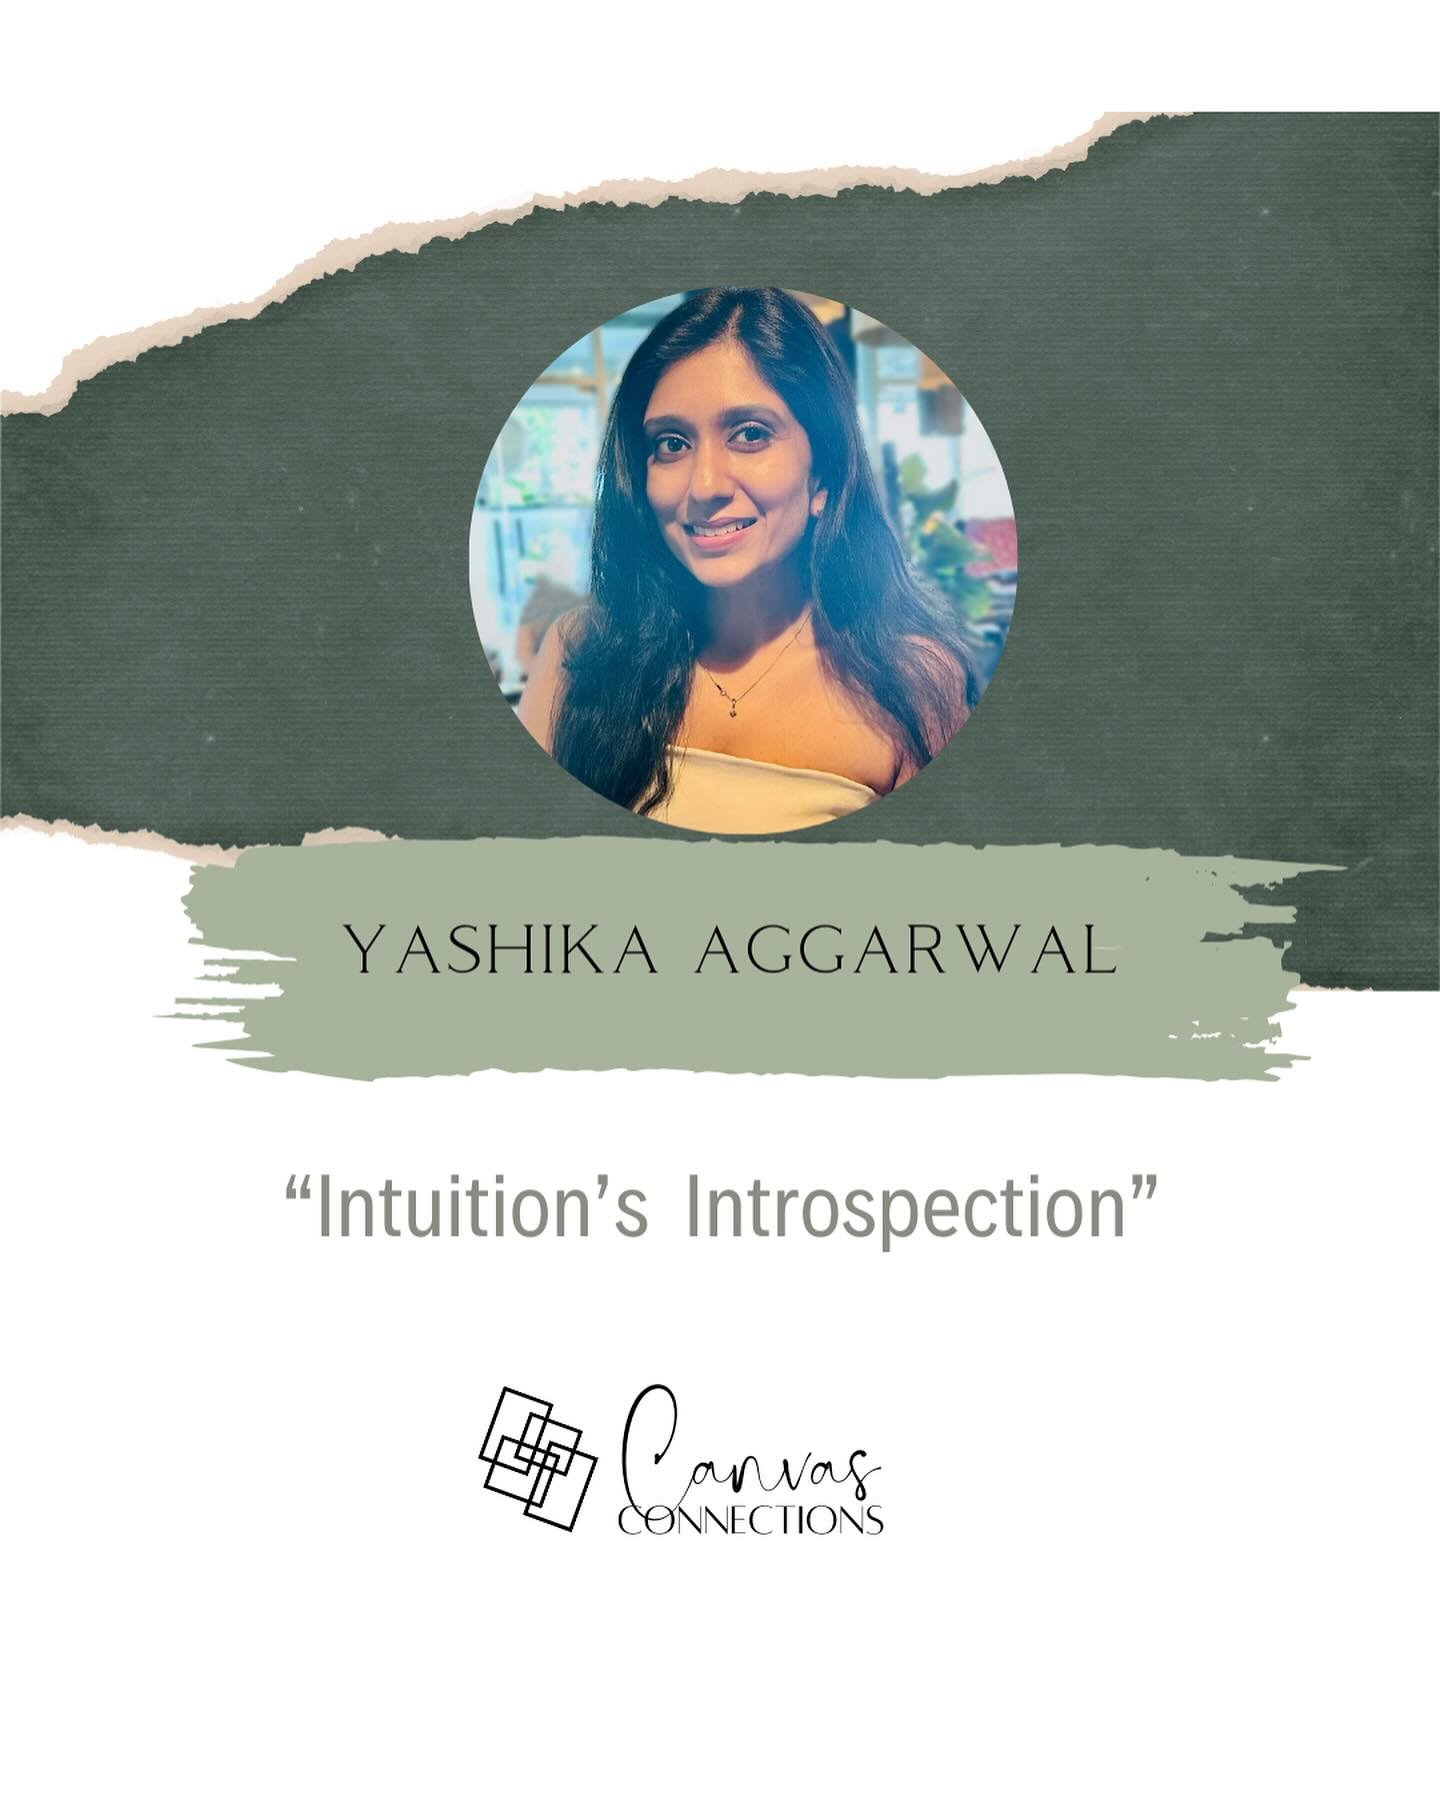 Yashika Aggarwal 
&ldquo;My art is a vulnerable reflection of my soul, an intimate journal that encapsulates my everyday journey through motherhood and the practice of yoga. It is through this artistic process that l explore and interpret the interco